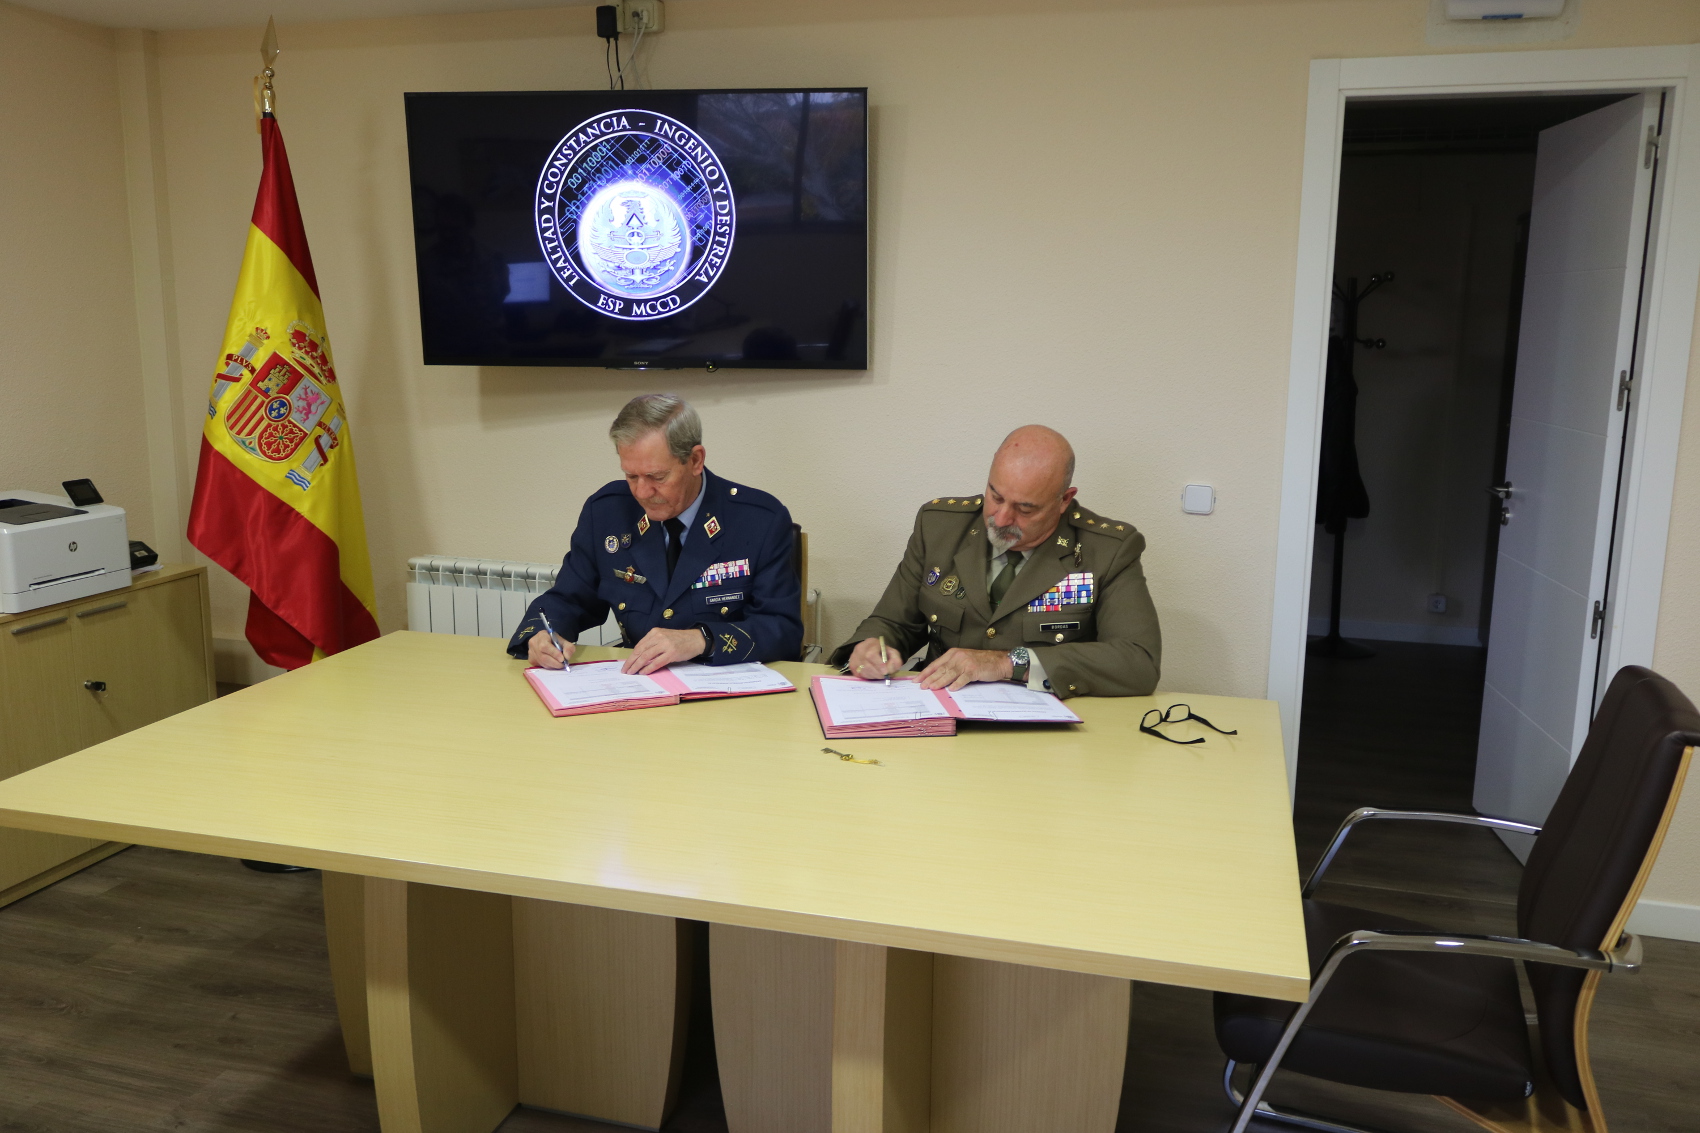 The Commander of the Joint Cyber-Defence Command receives the keys of the new MCCD building